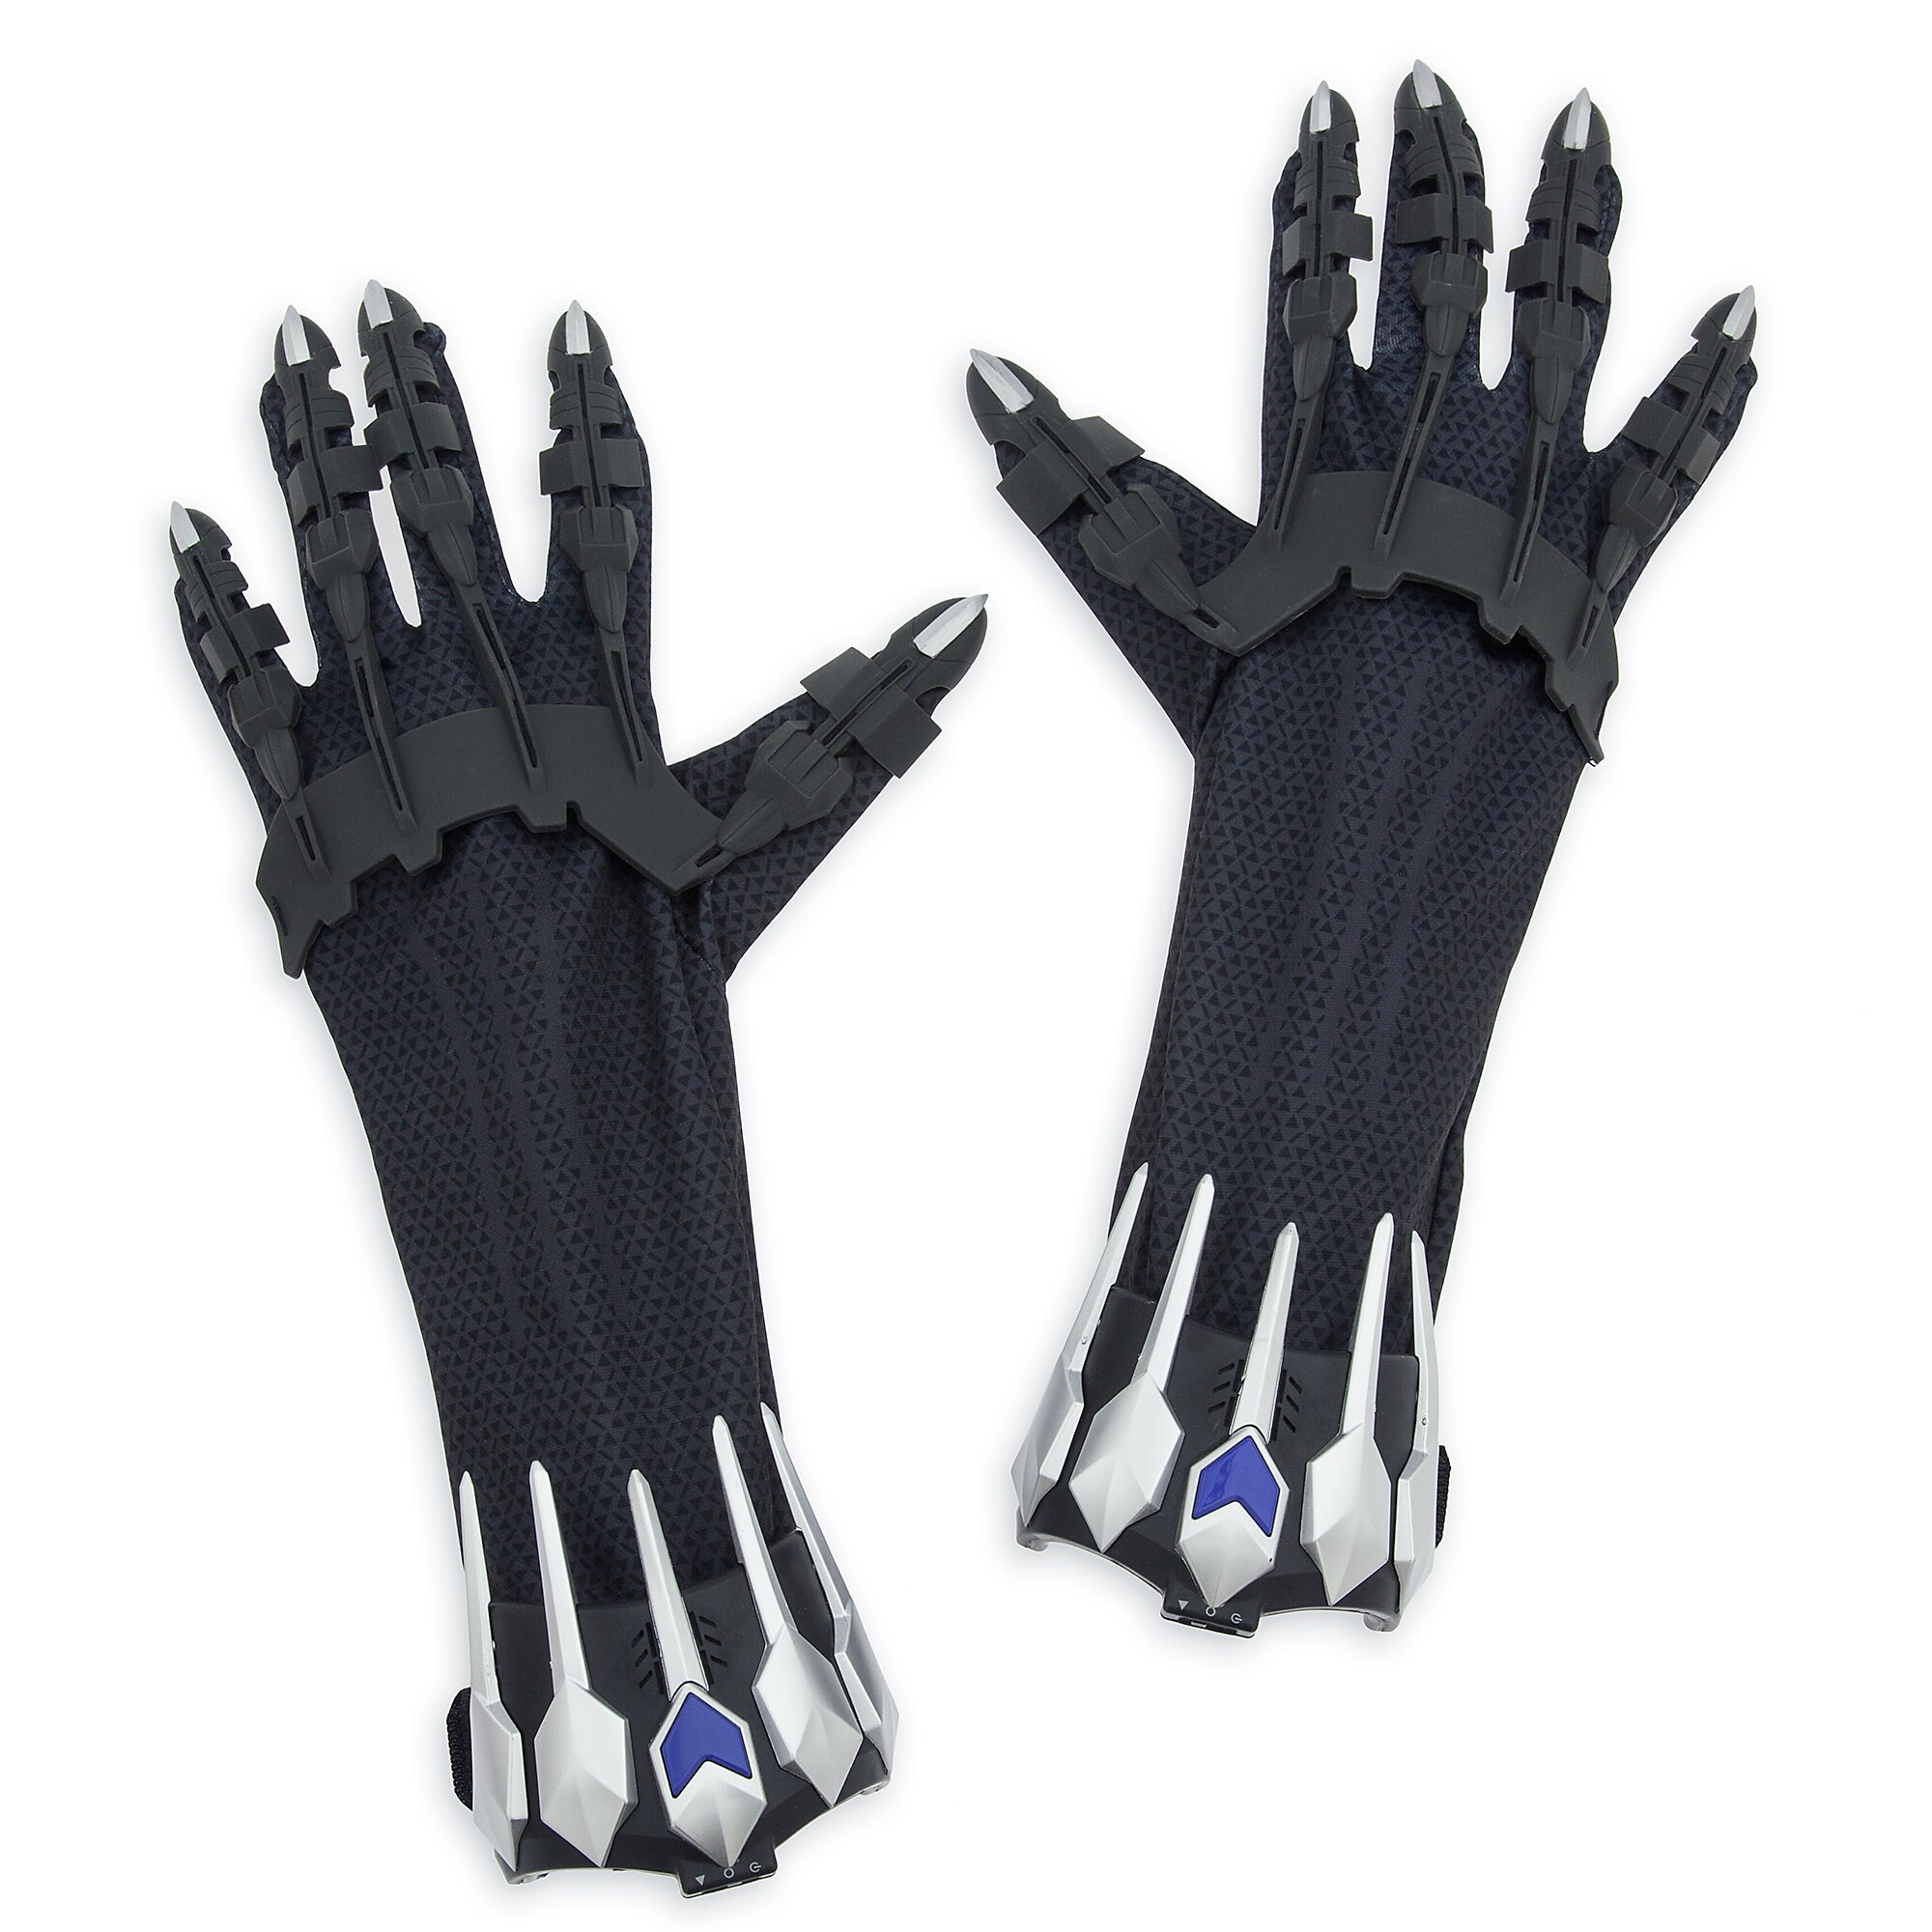 Black Panther Glove Set with Battle Sounds